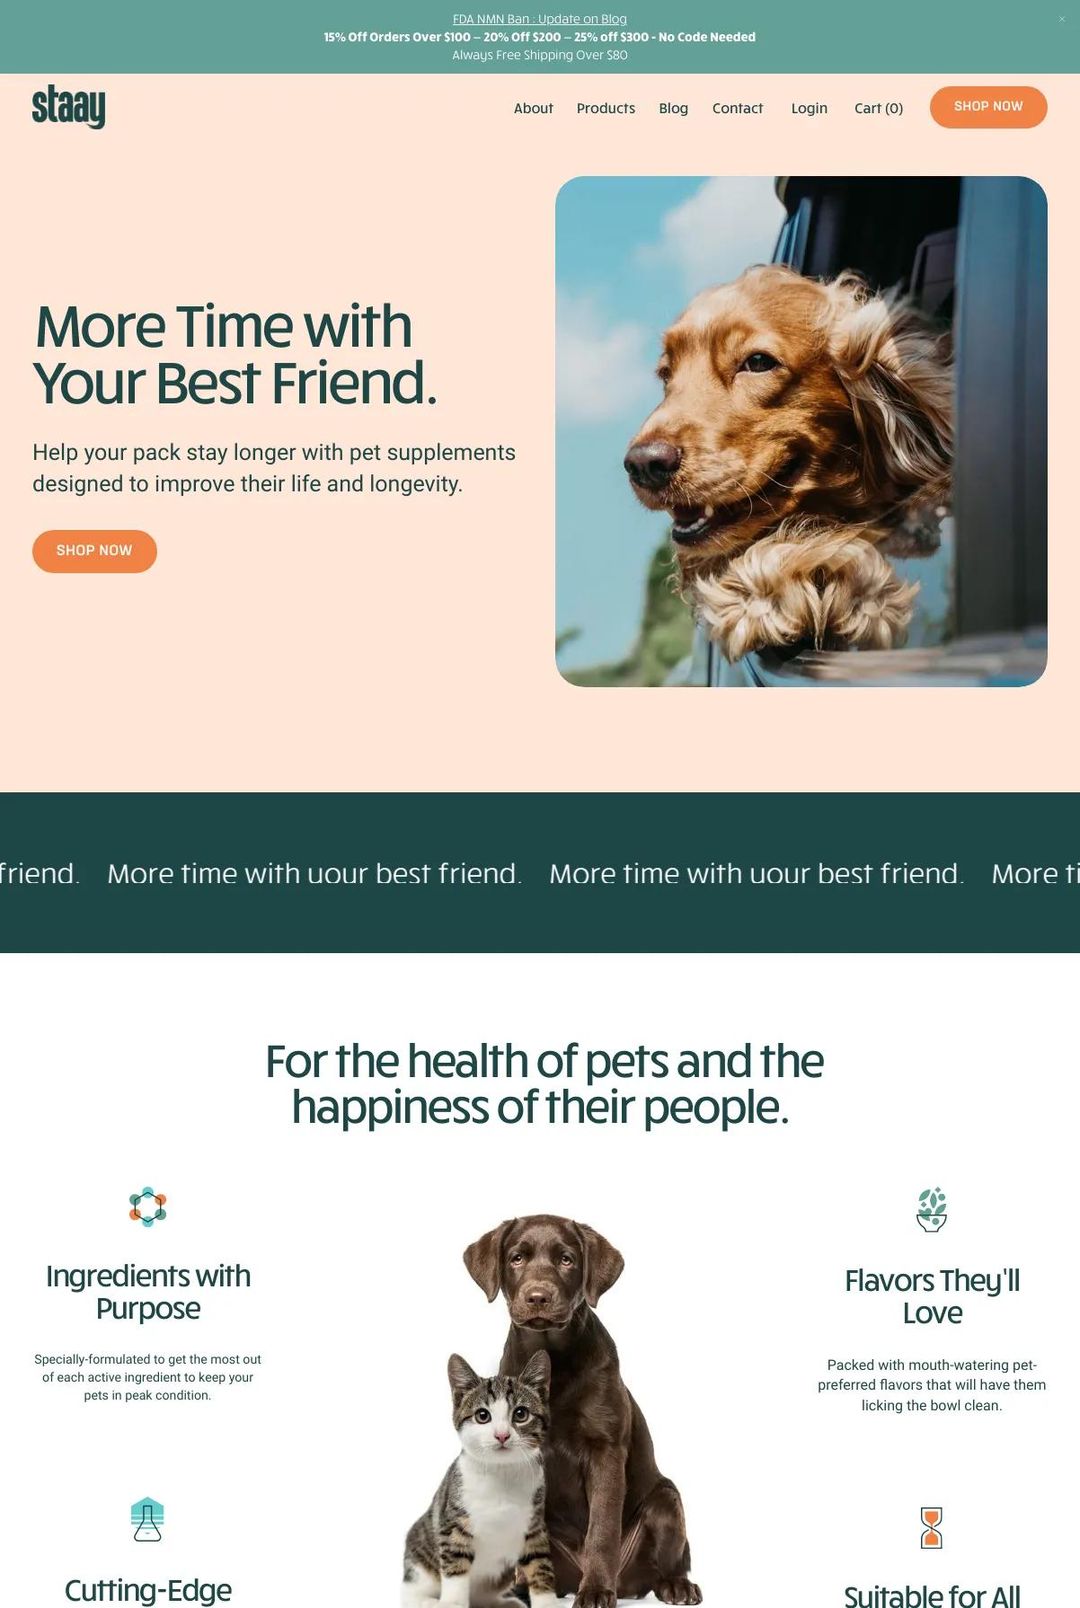 Screenshot 1 of Staay: Pet Supplements (Example Squarespace Ecommerce Website)